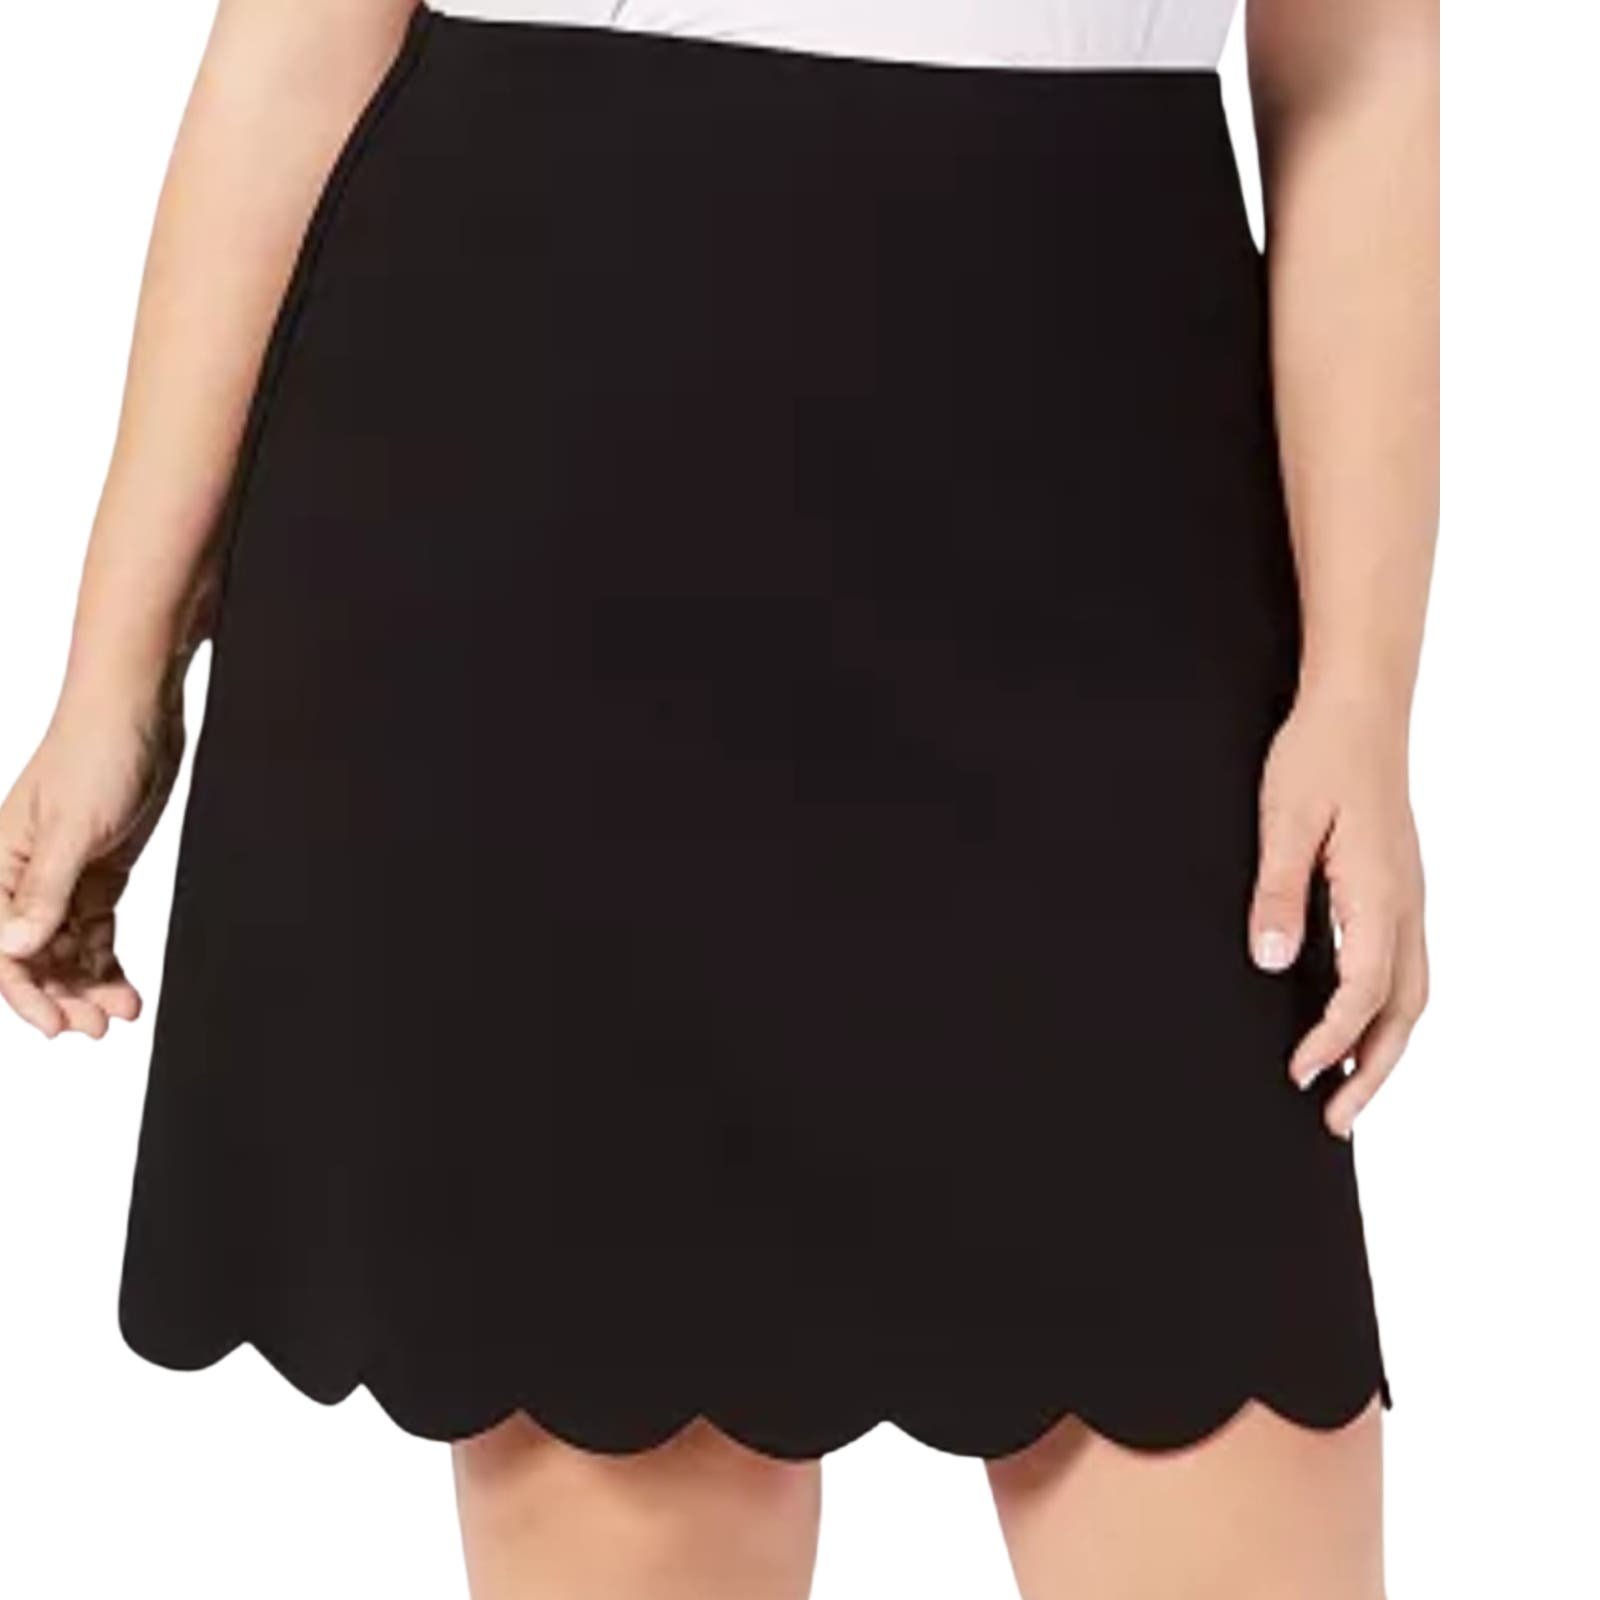 Fashion Trendy Scalloped A-Line Skirt Size 2X New with 